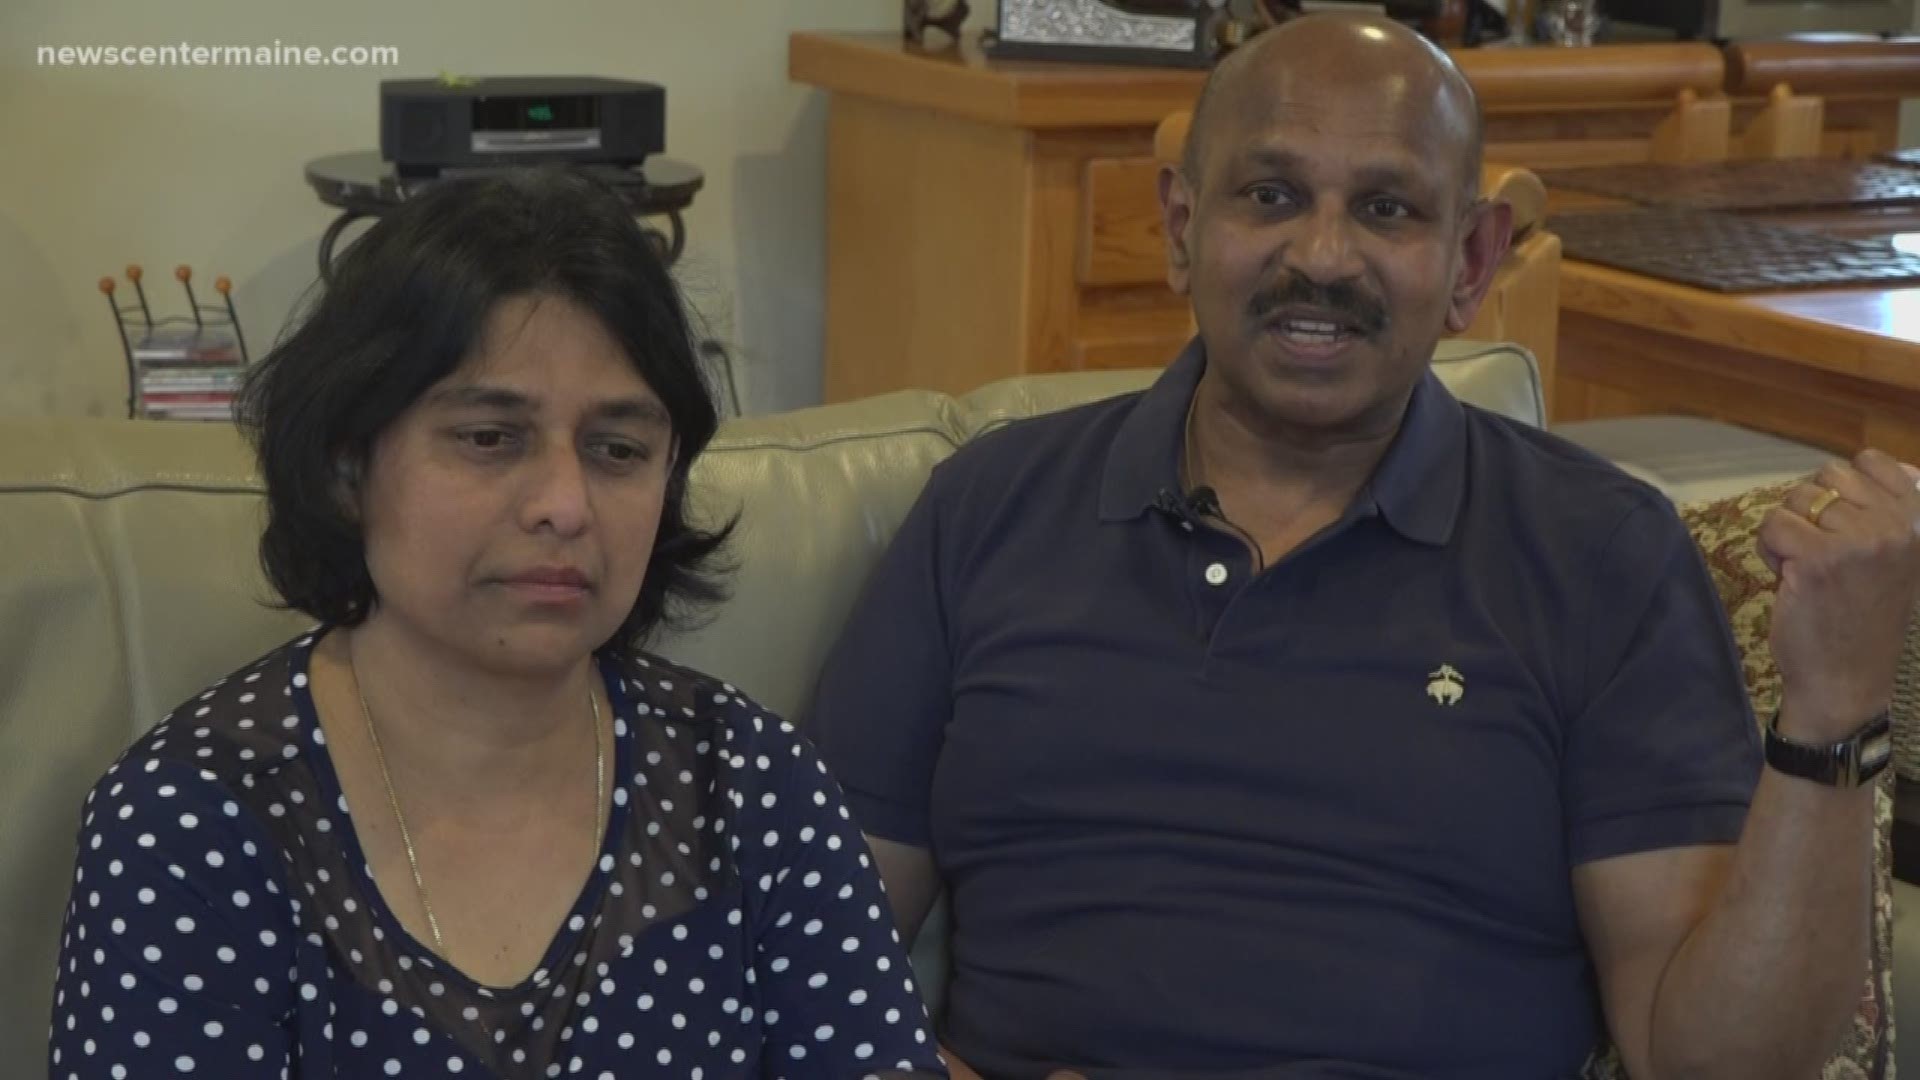 A Maine couple, originally from Sri Lanka, was devastated to learn about the attacks in the country on Easter Sunday.